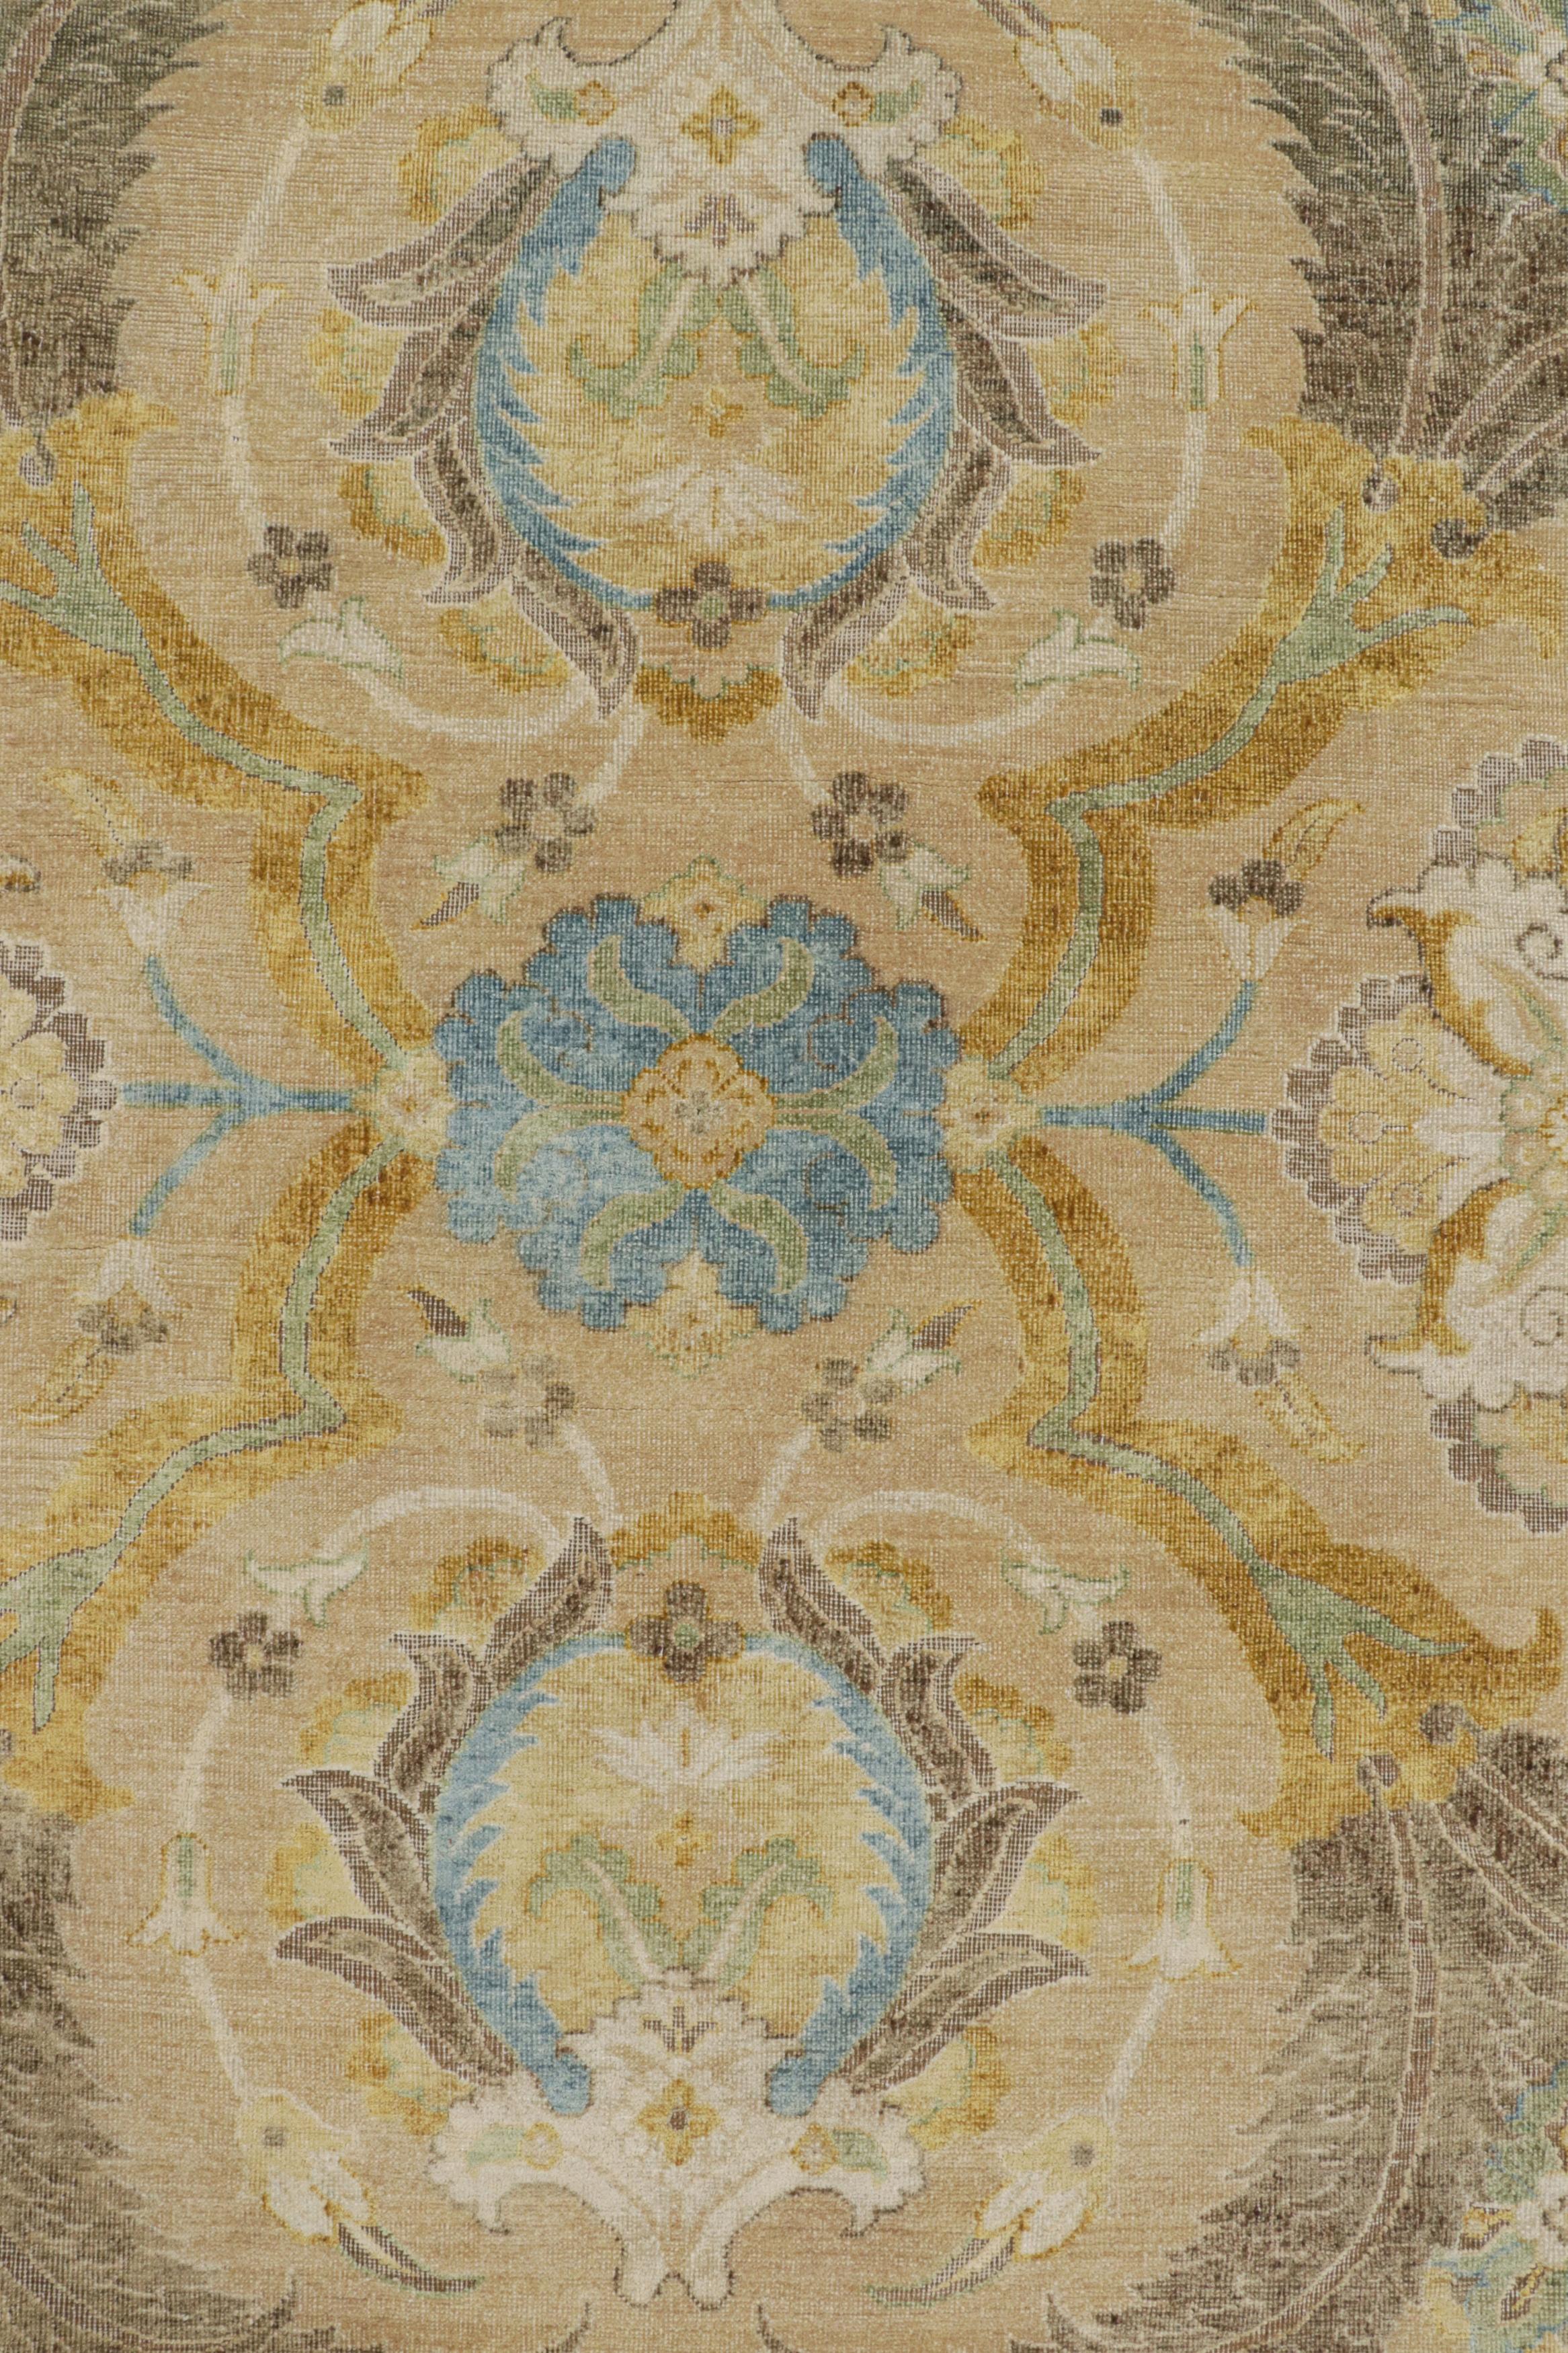 Modern Rug & Kilim’s Polonaise Style rug in Beige with Gold and Blue Floral Patterns For Sale